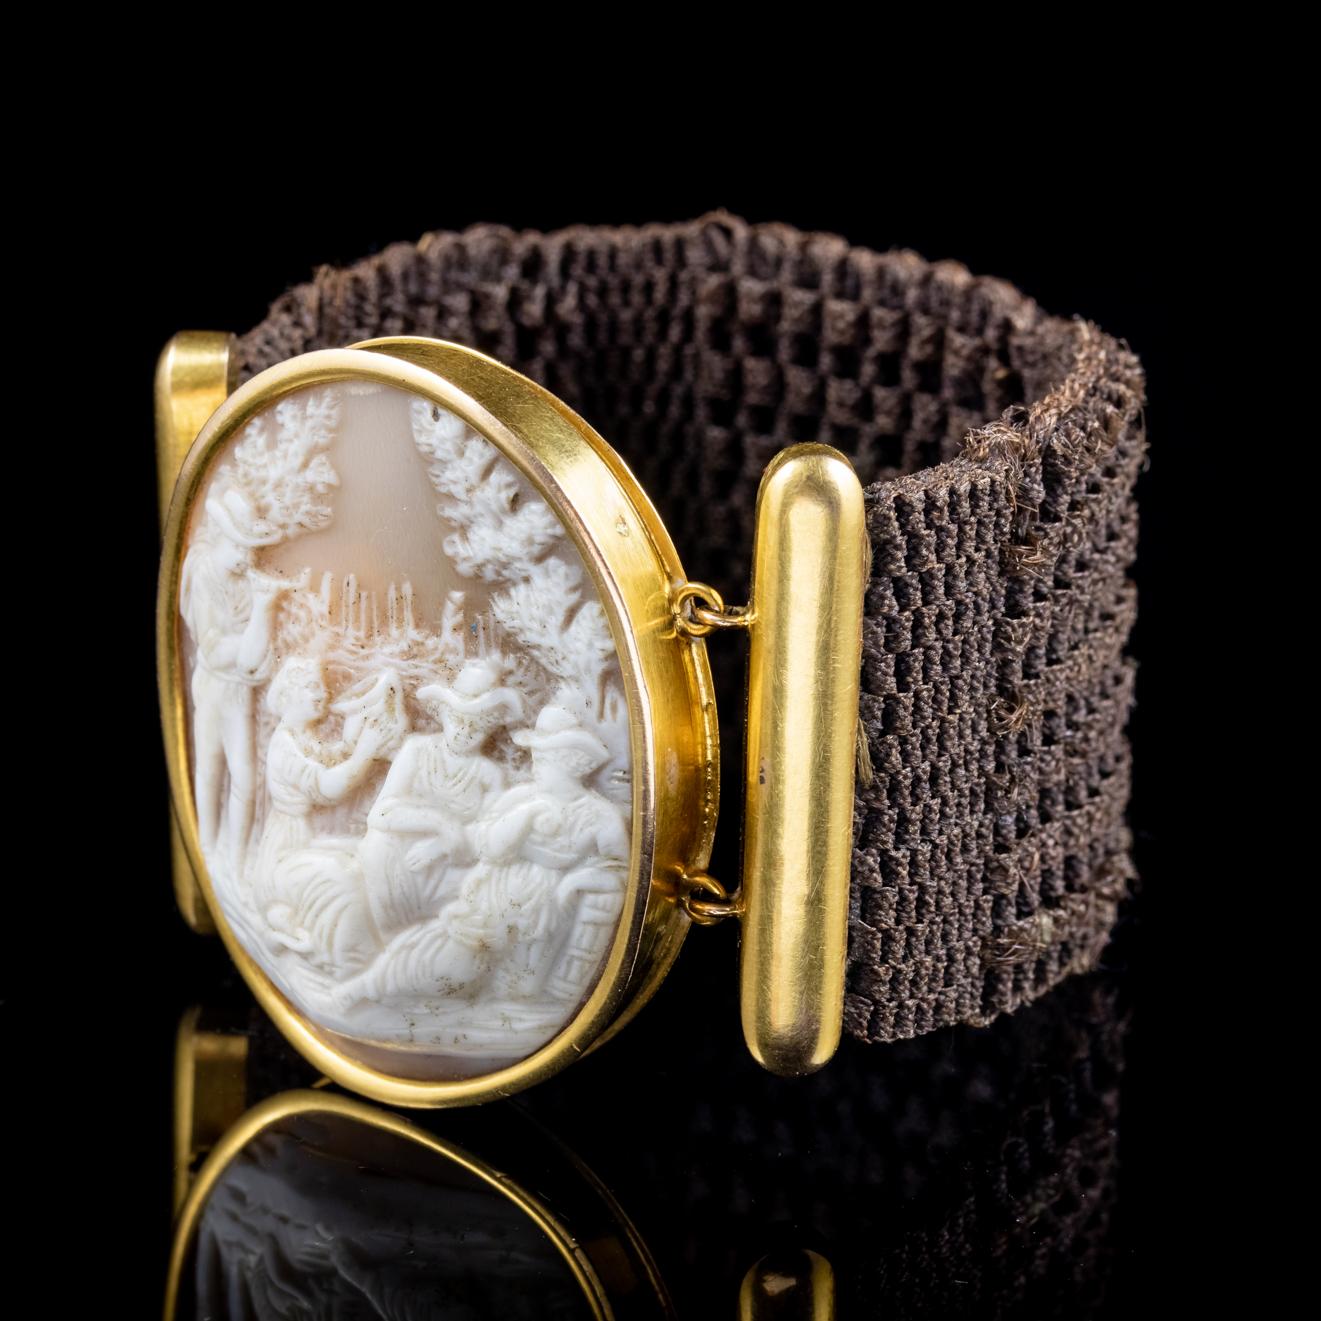 A wonderful antique Georgian Mourning bracelet featuring a carved bullmouth shell Cameo fitted to a lovely band made up of fine brown hair which has been intricately woven into tight plaits to create this wonderful elastic band that can stretch to